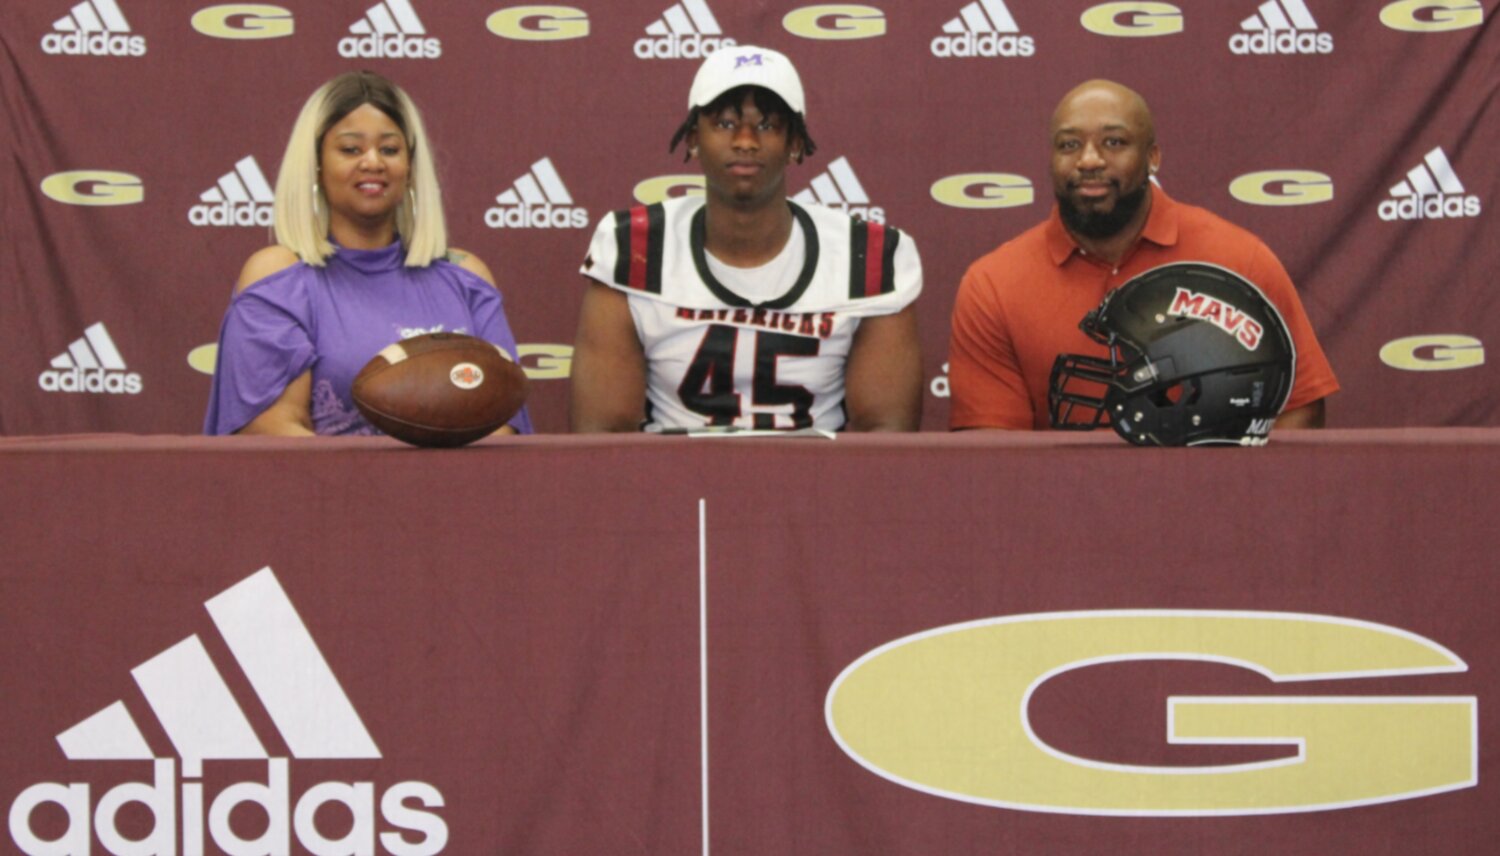 Senior, Demarcus Wright, signed to play football at Millsaps College. Pictured with Demarcus are his parents, DeMarcus Wright Sr. and Ronda Crump.